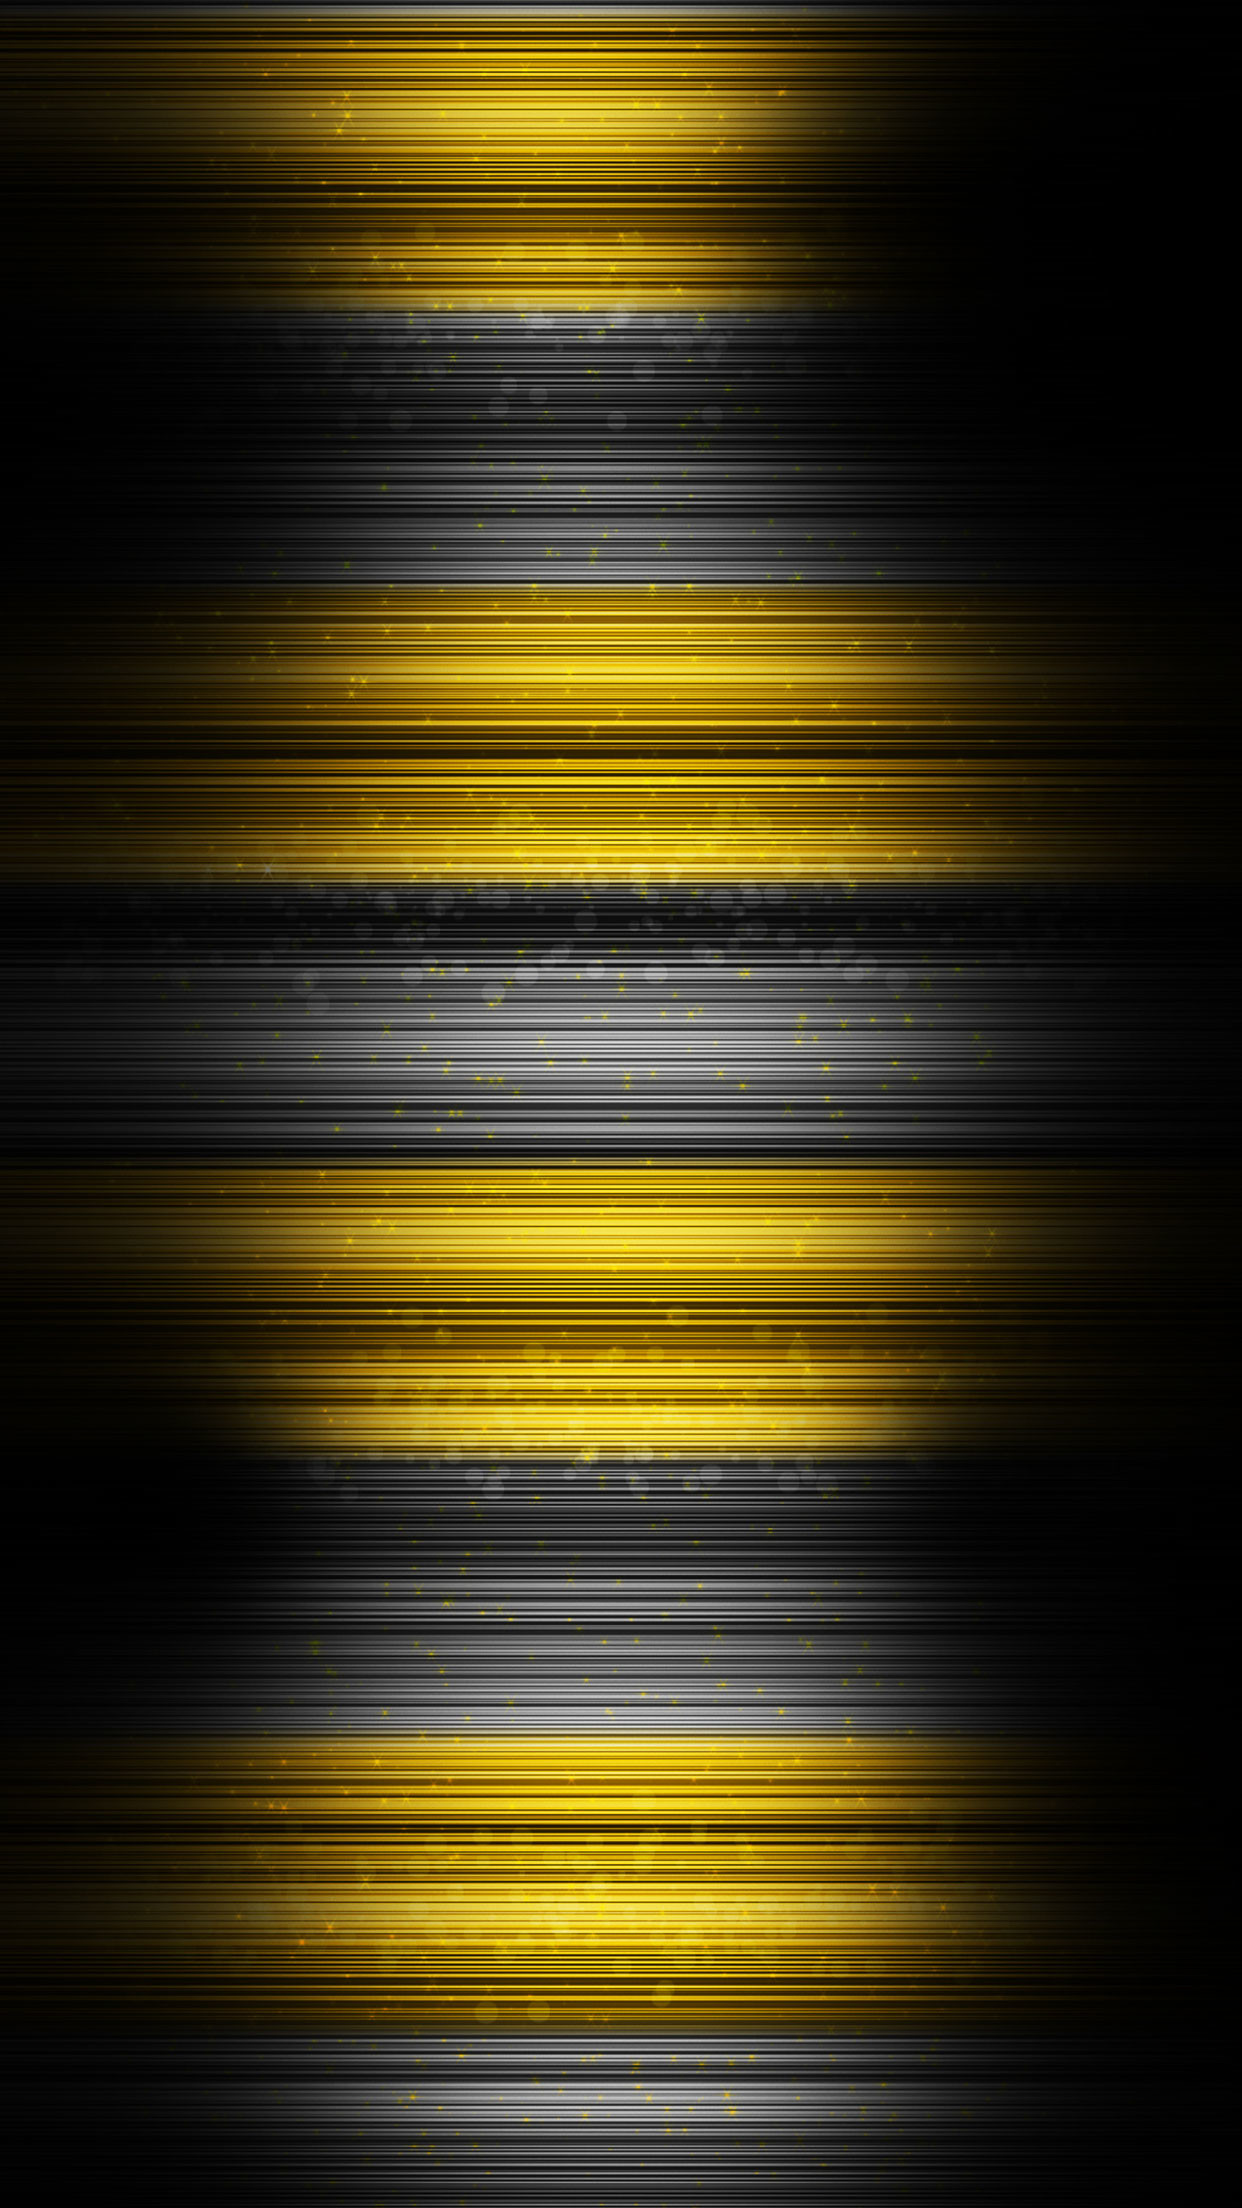 Yellow and black abstract wallpaper for #Iphone and #Android #abstract # wallpaper more